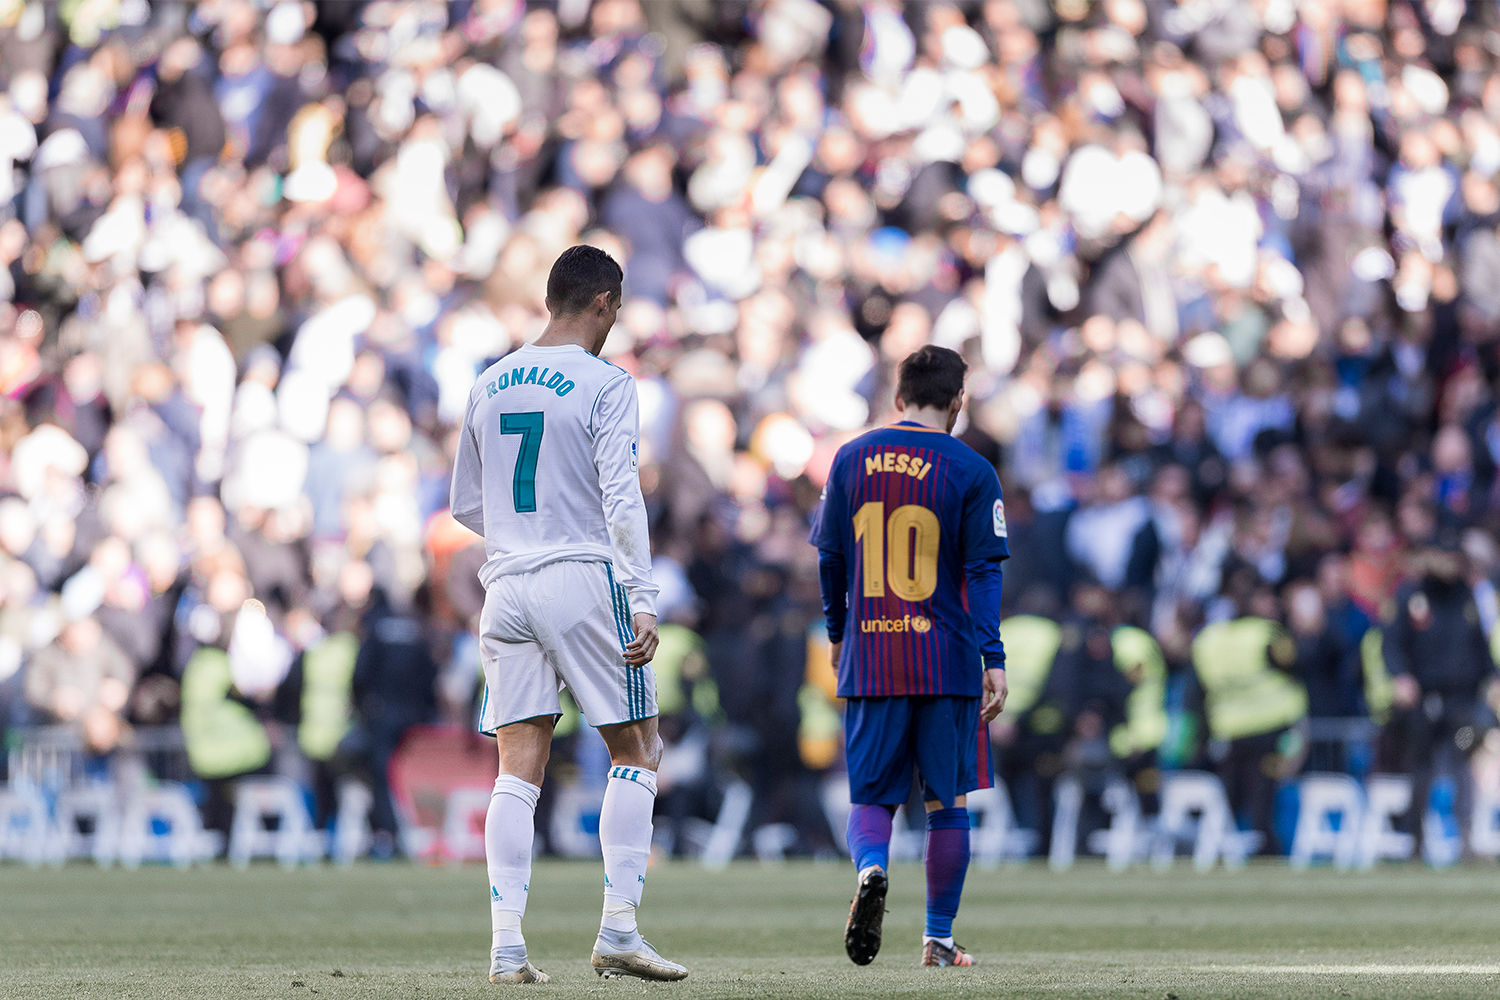 Lionel Messi of FC Barcelona and Cristiano Ronaldo of Real Madrid walk off pitch during La Liga match between Real Madrid and FC Barcelona at Santiago Bernabeu stadium on December 23, 2017 in Madrid, Spain.